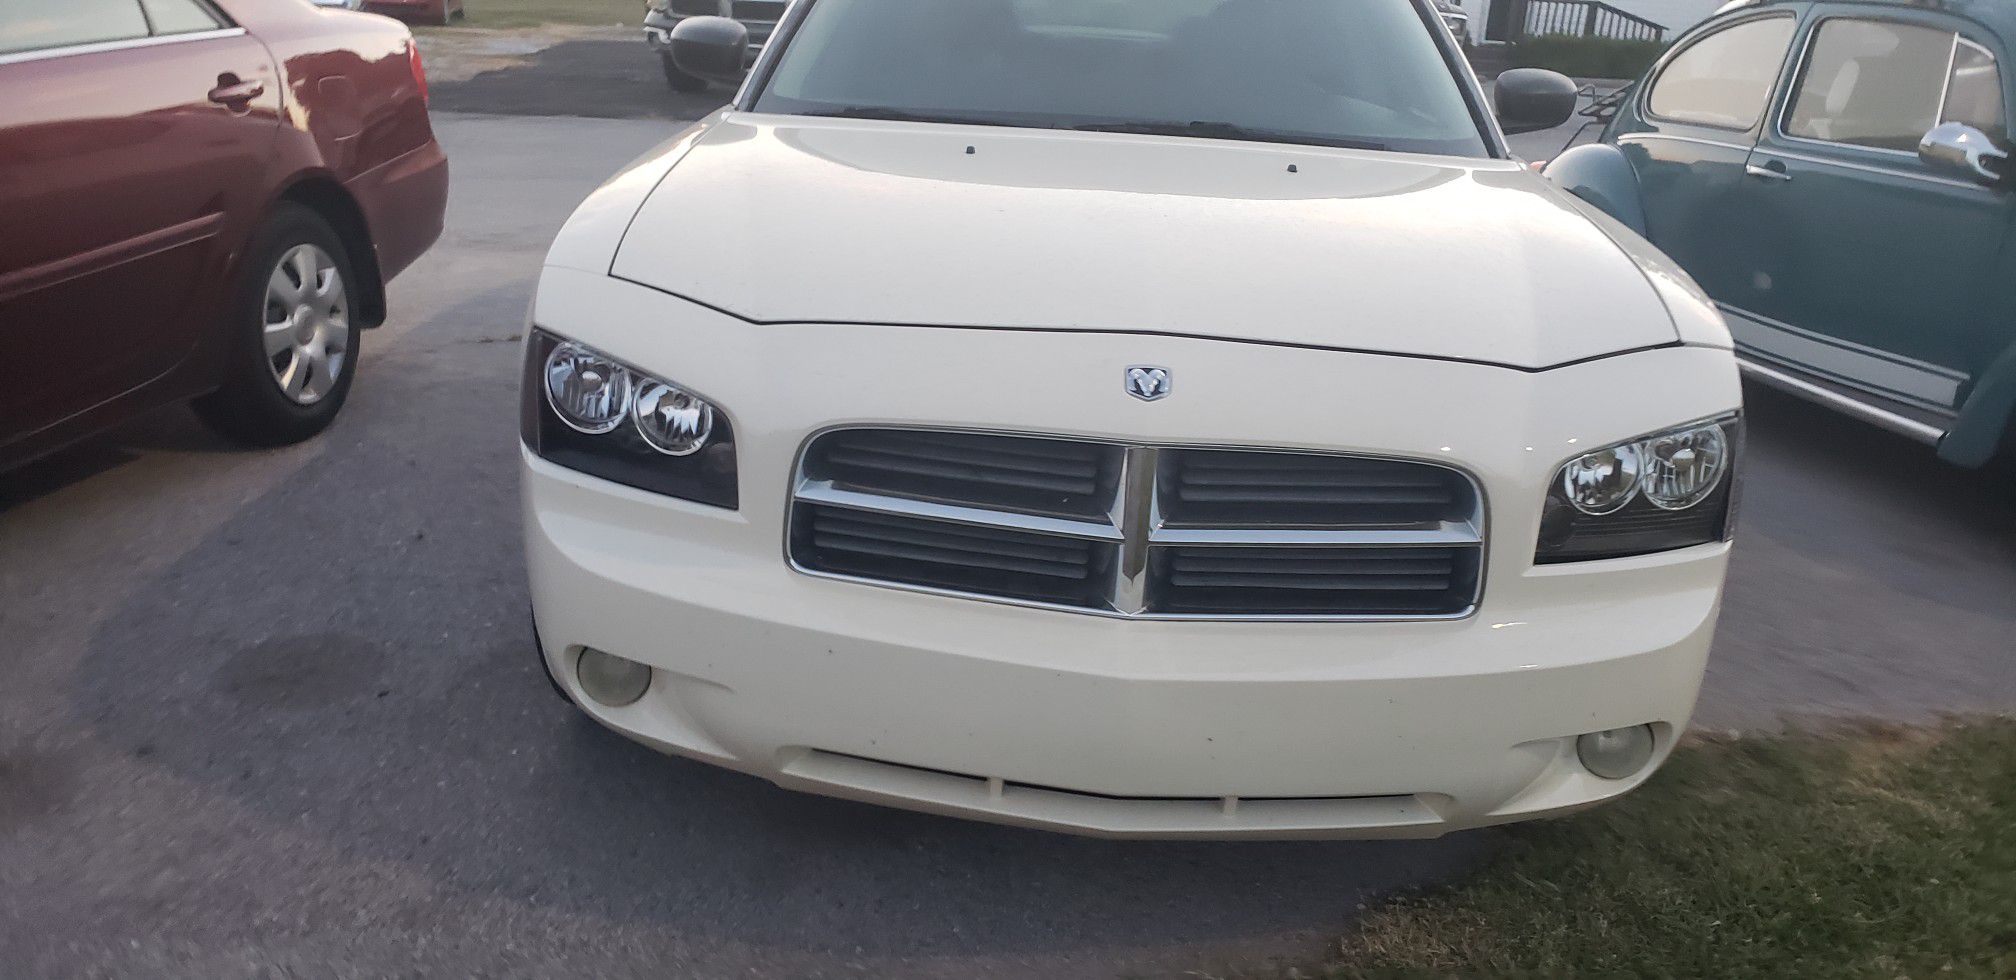 2006 dodge charger